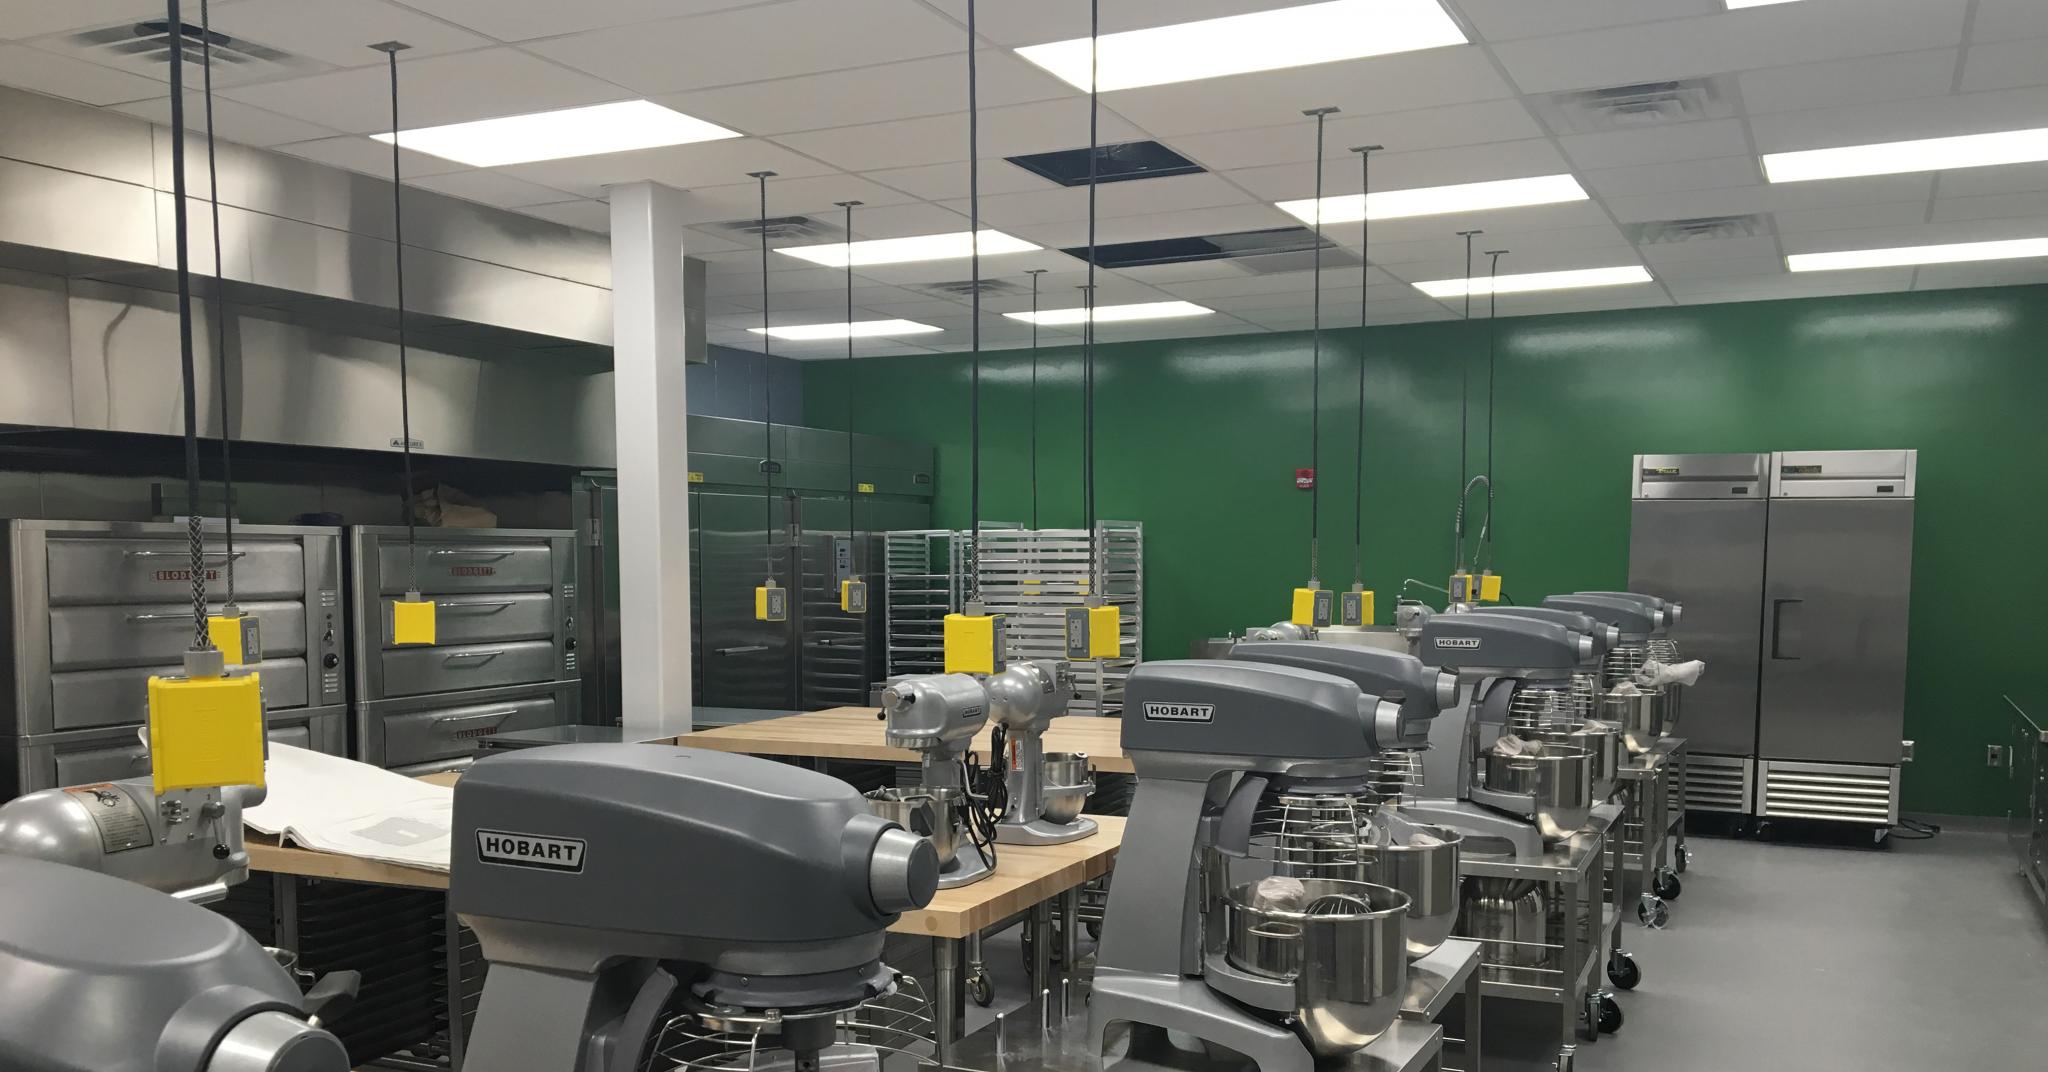 image of bakery equipment in a room with green walls